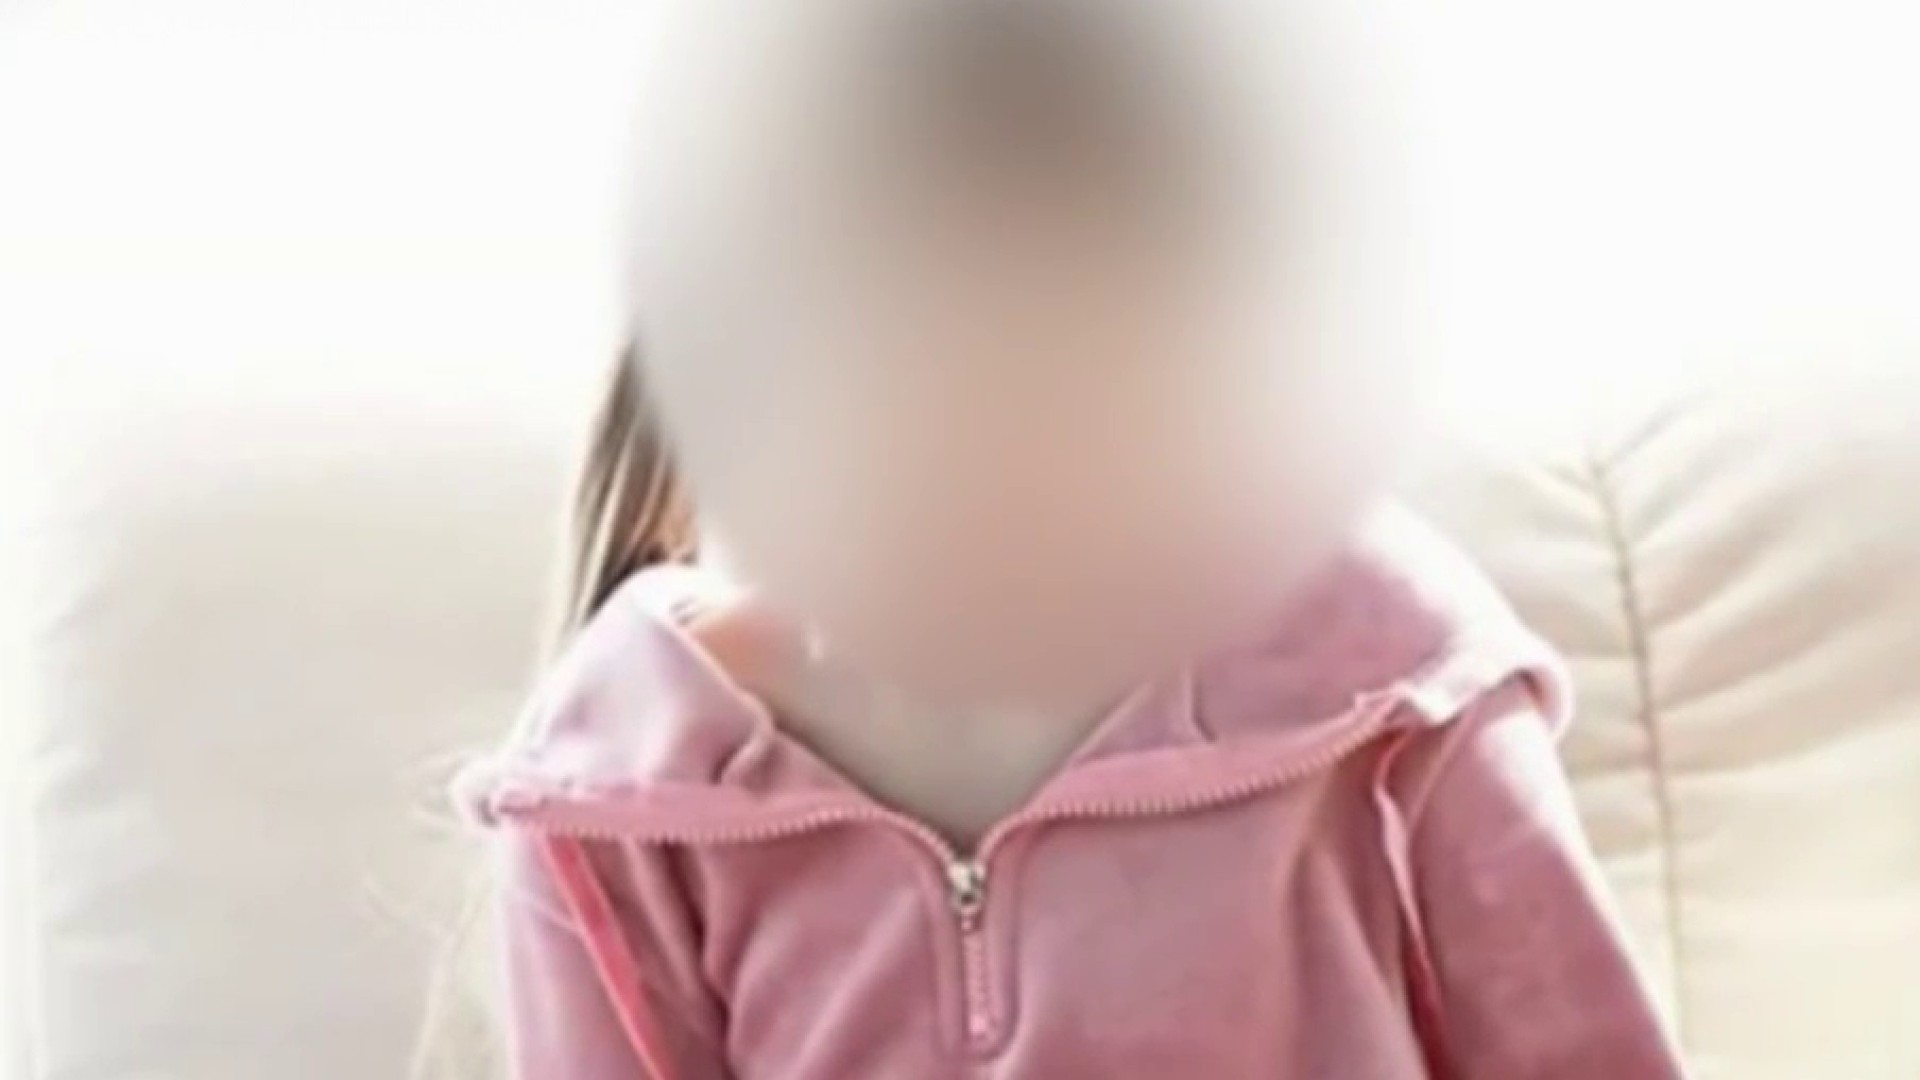 Mom Bathroom Bilakmil Son Sex - Mom Fights to Ban Child Sex Dolls After Daughter's Likeness Was Used for  One â€“ NBC 6 South Florida